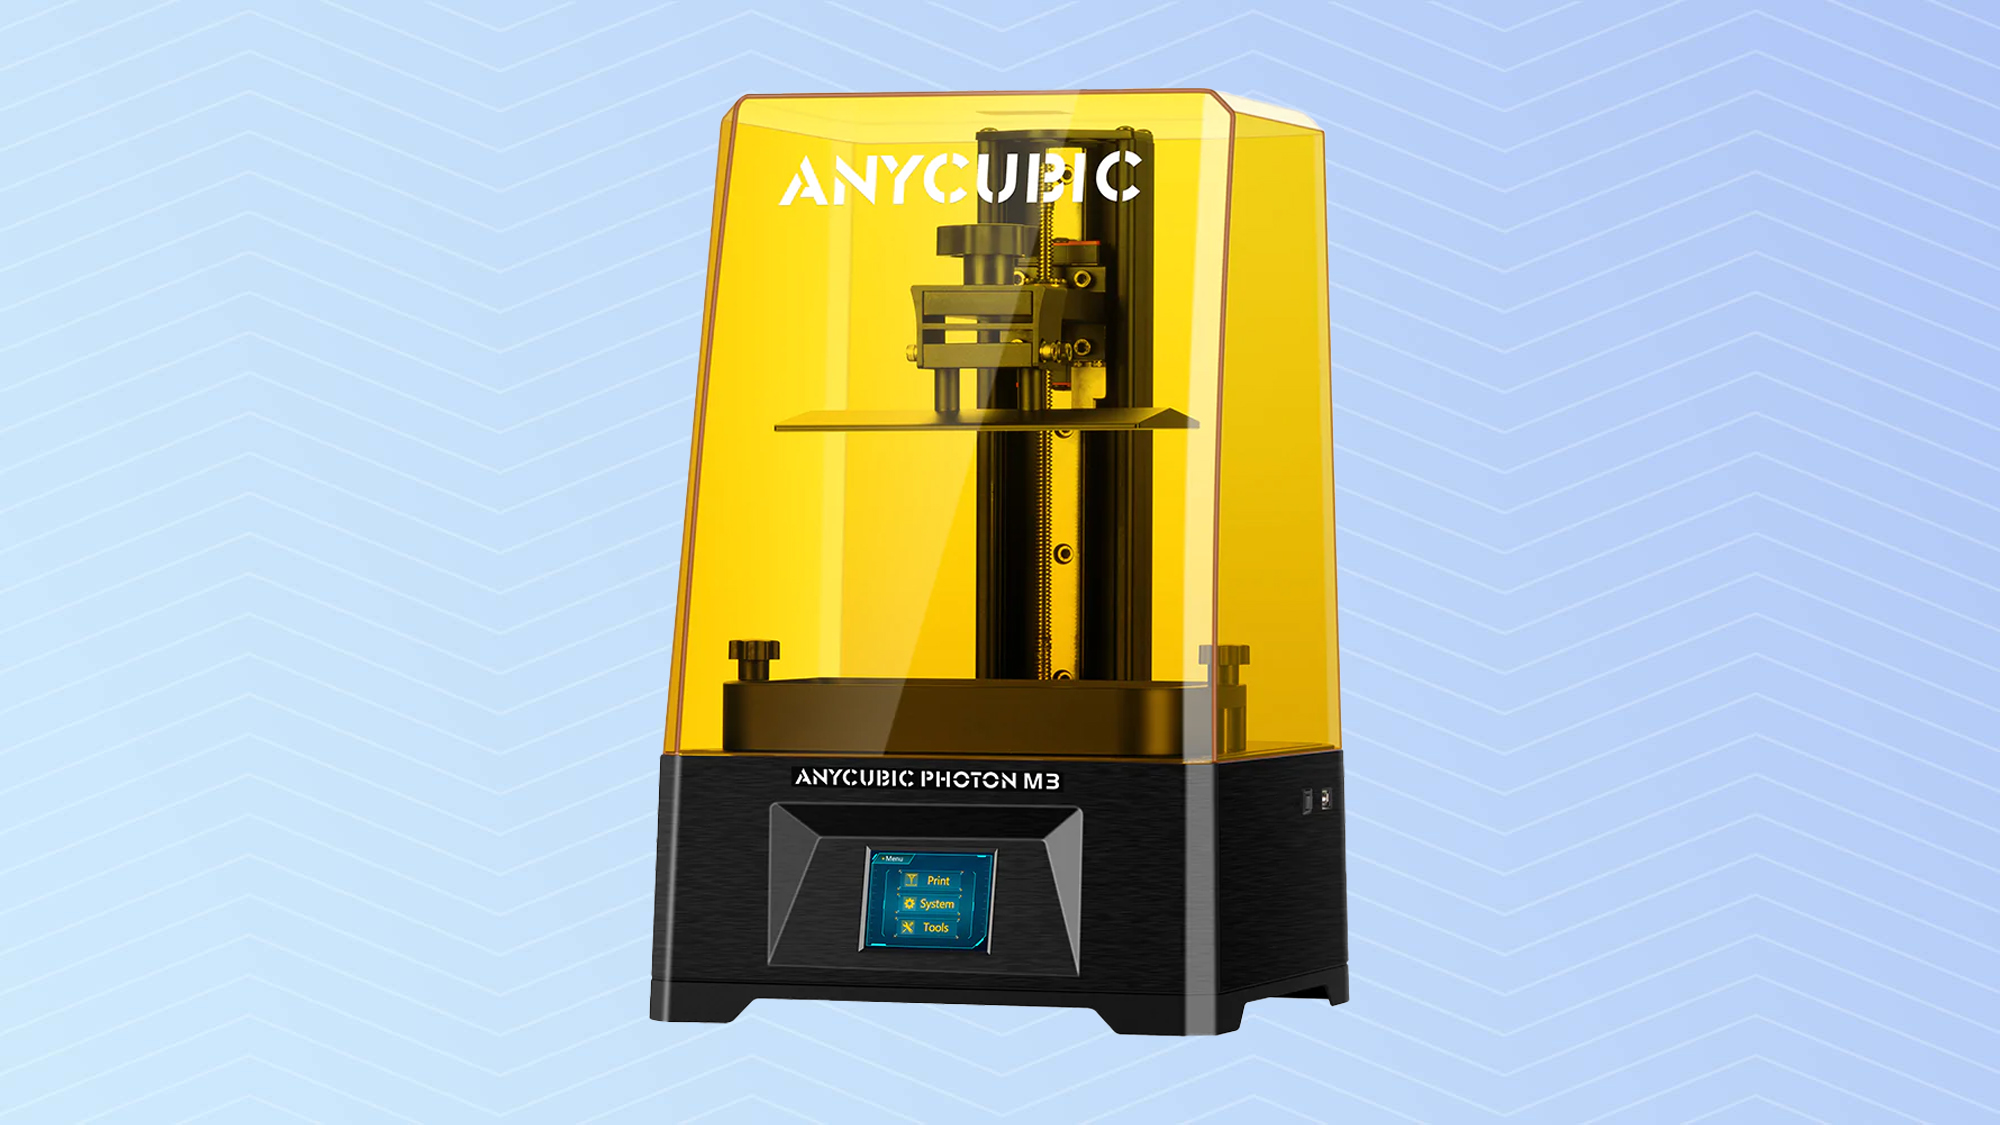 Anycubic Photon M3 3D printer review: The cheapest resin-based printer we’ve seen